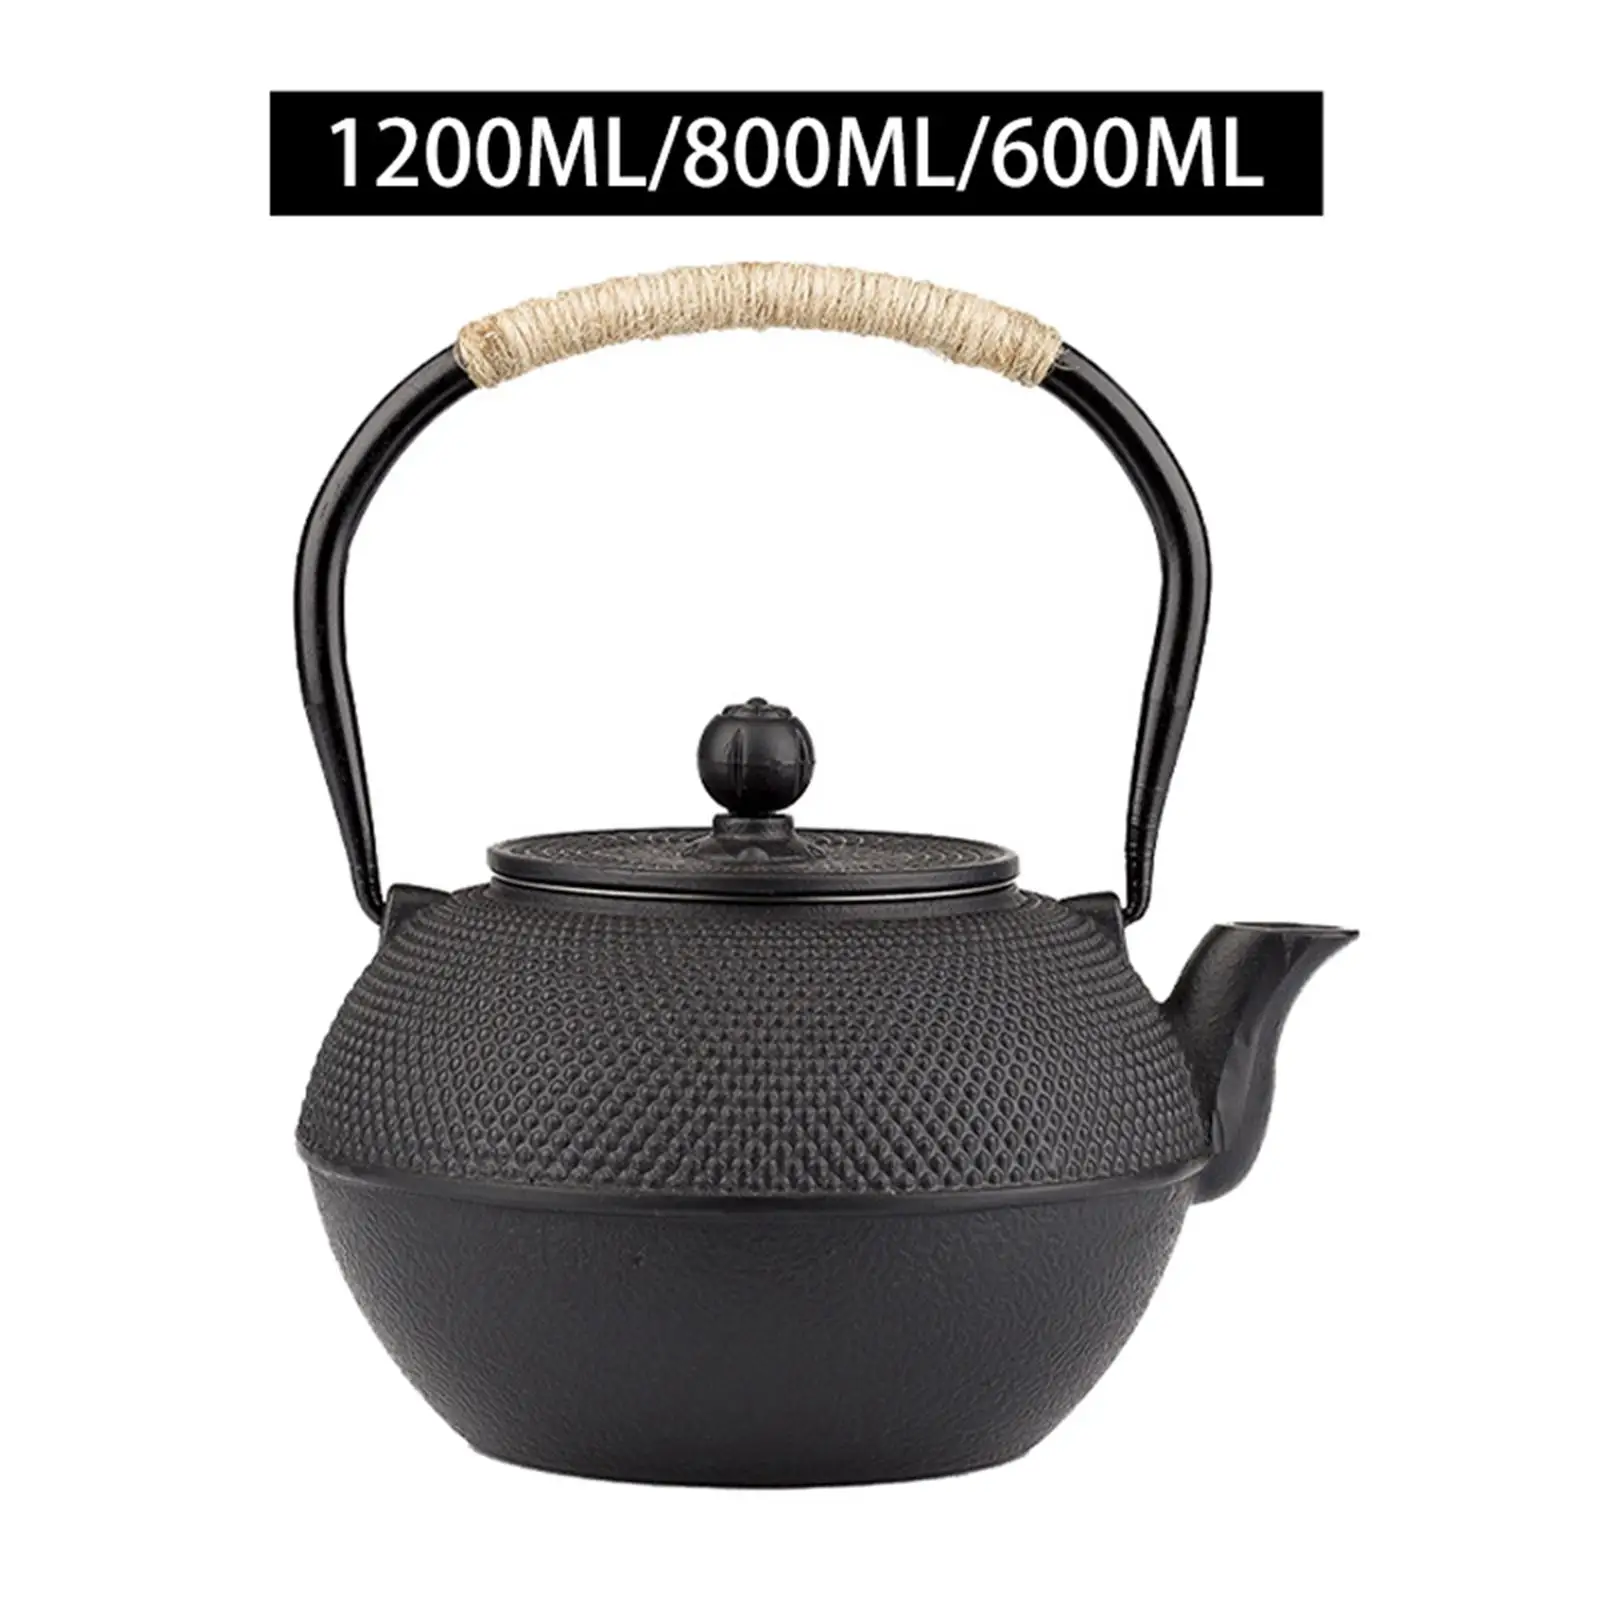 Cast Iron Teapot Tea Kettle Easily Clean Kitchen Decoration Gift Handle Wrapped with Rope Anti Scalding